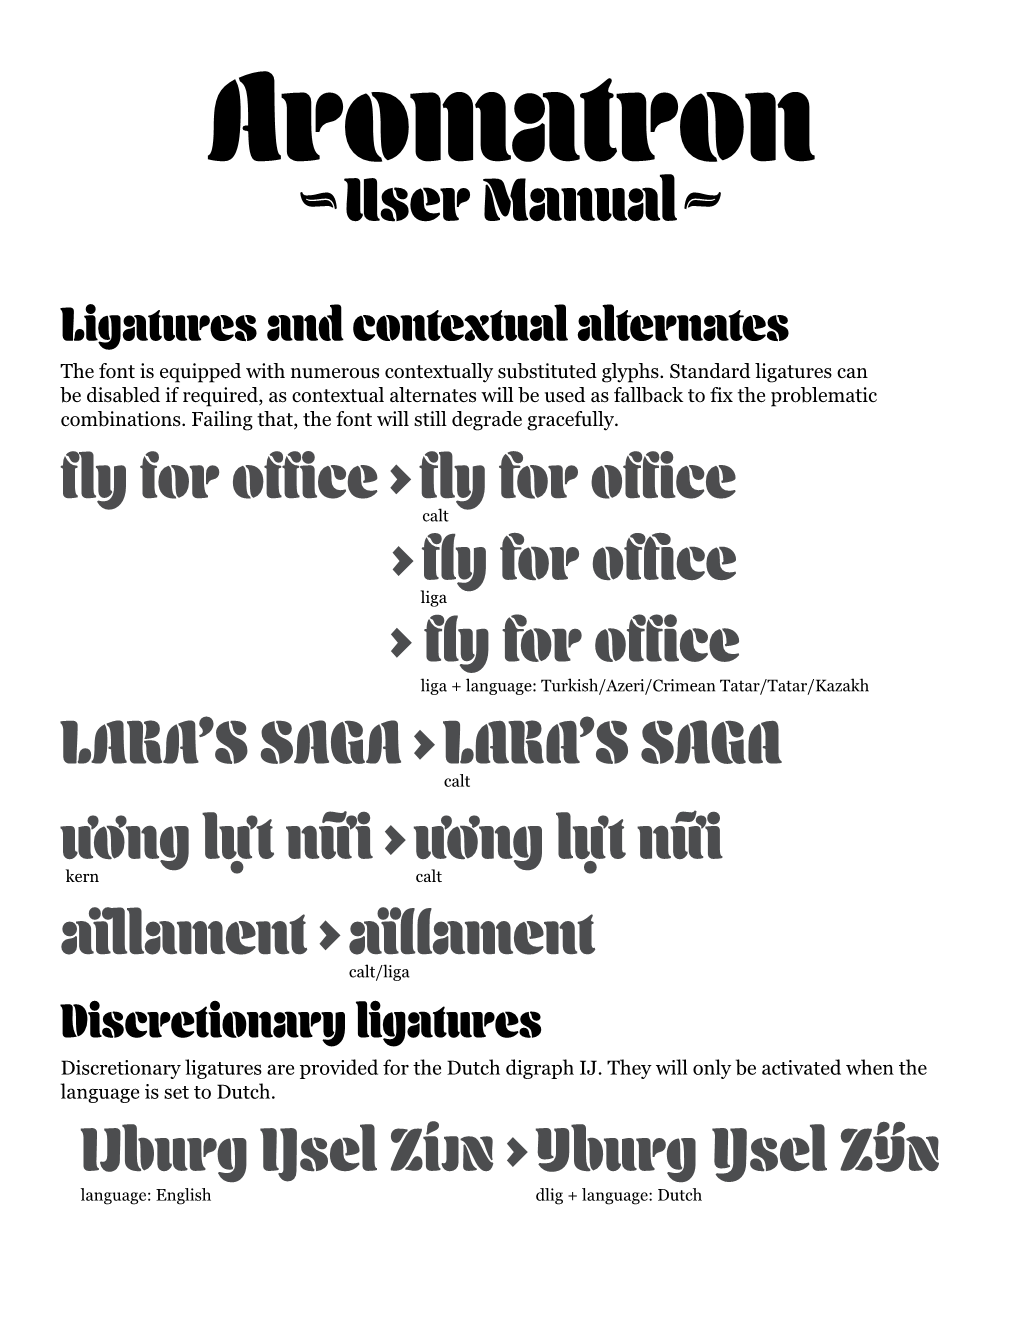 • User Manual Fly for Office › Fly for Office › Fly for Office › Fly for Office